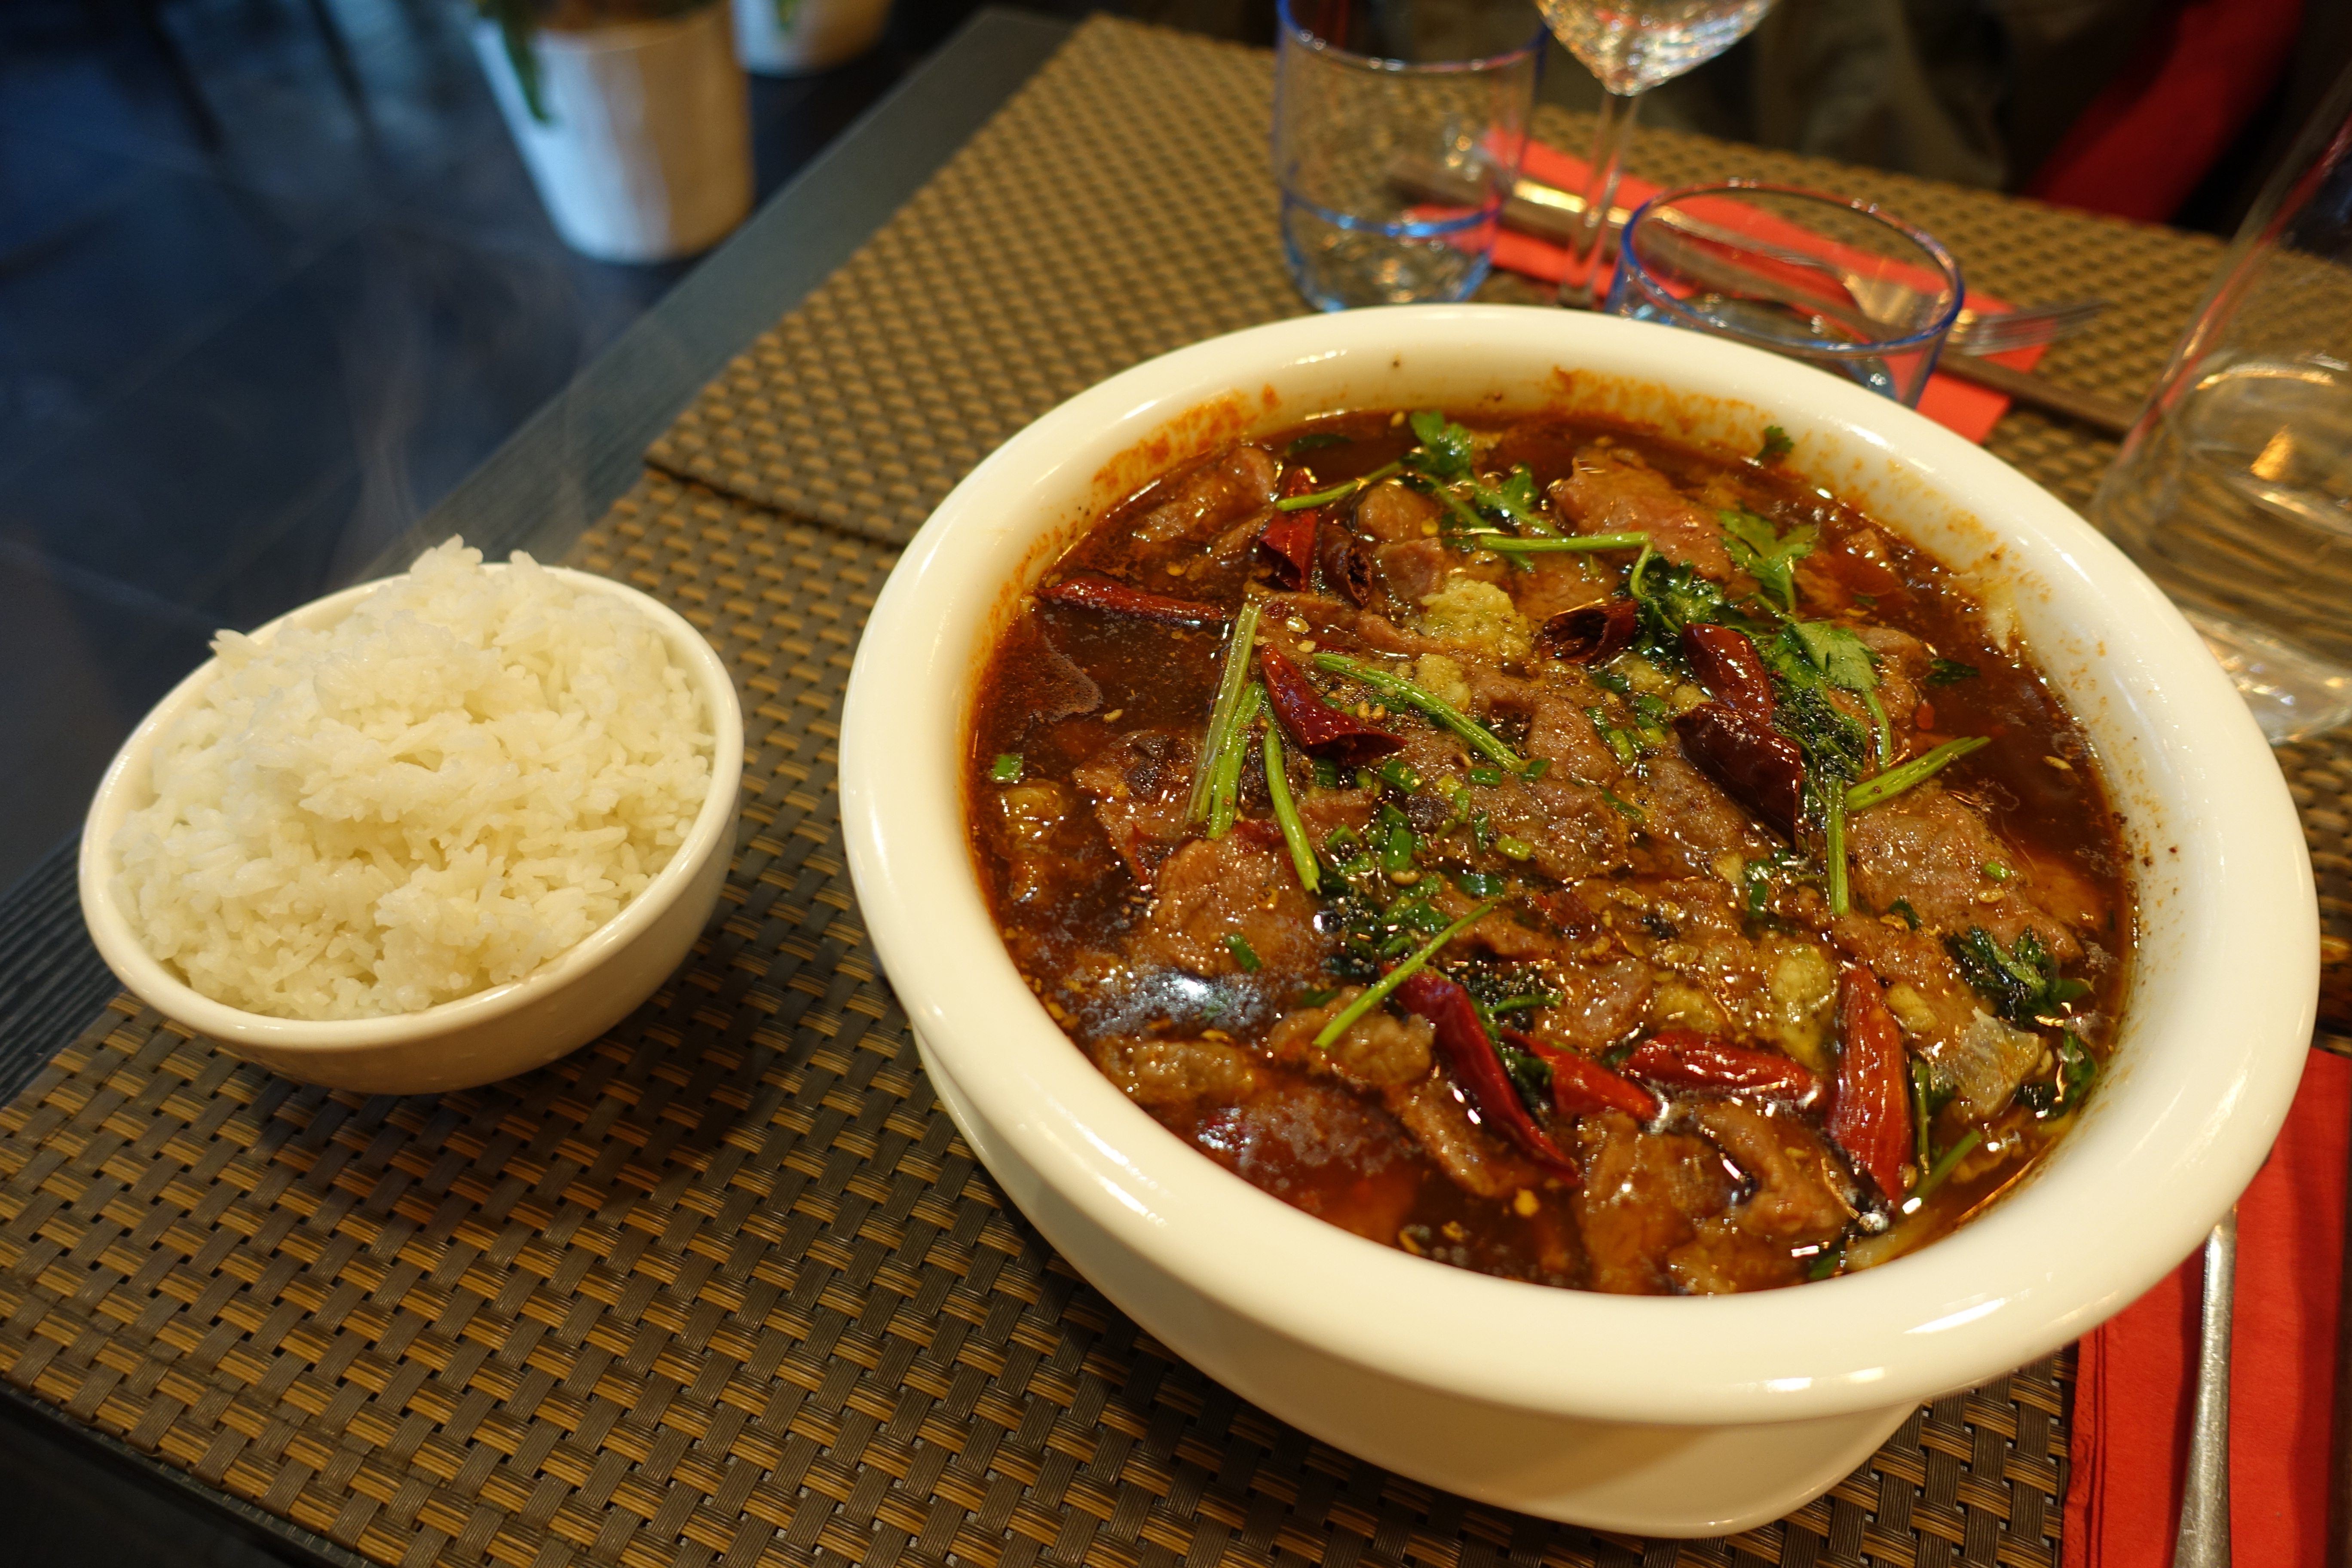 File:Water-boiled beef in chili sauce, Tête à tête, Paris 001.jpg -  Wikimedia Commons